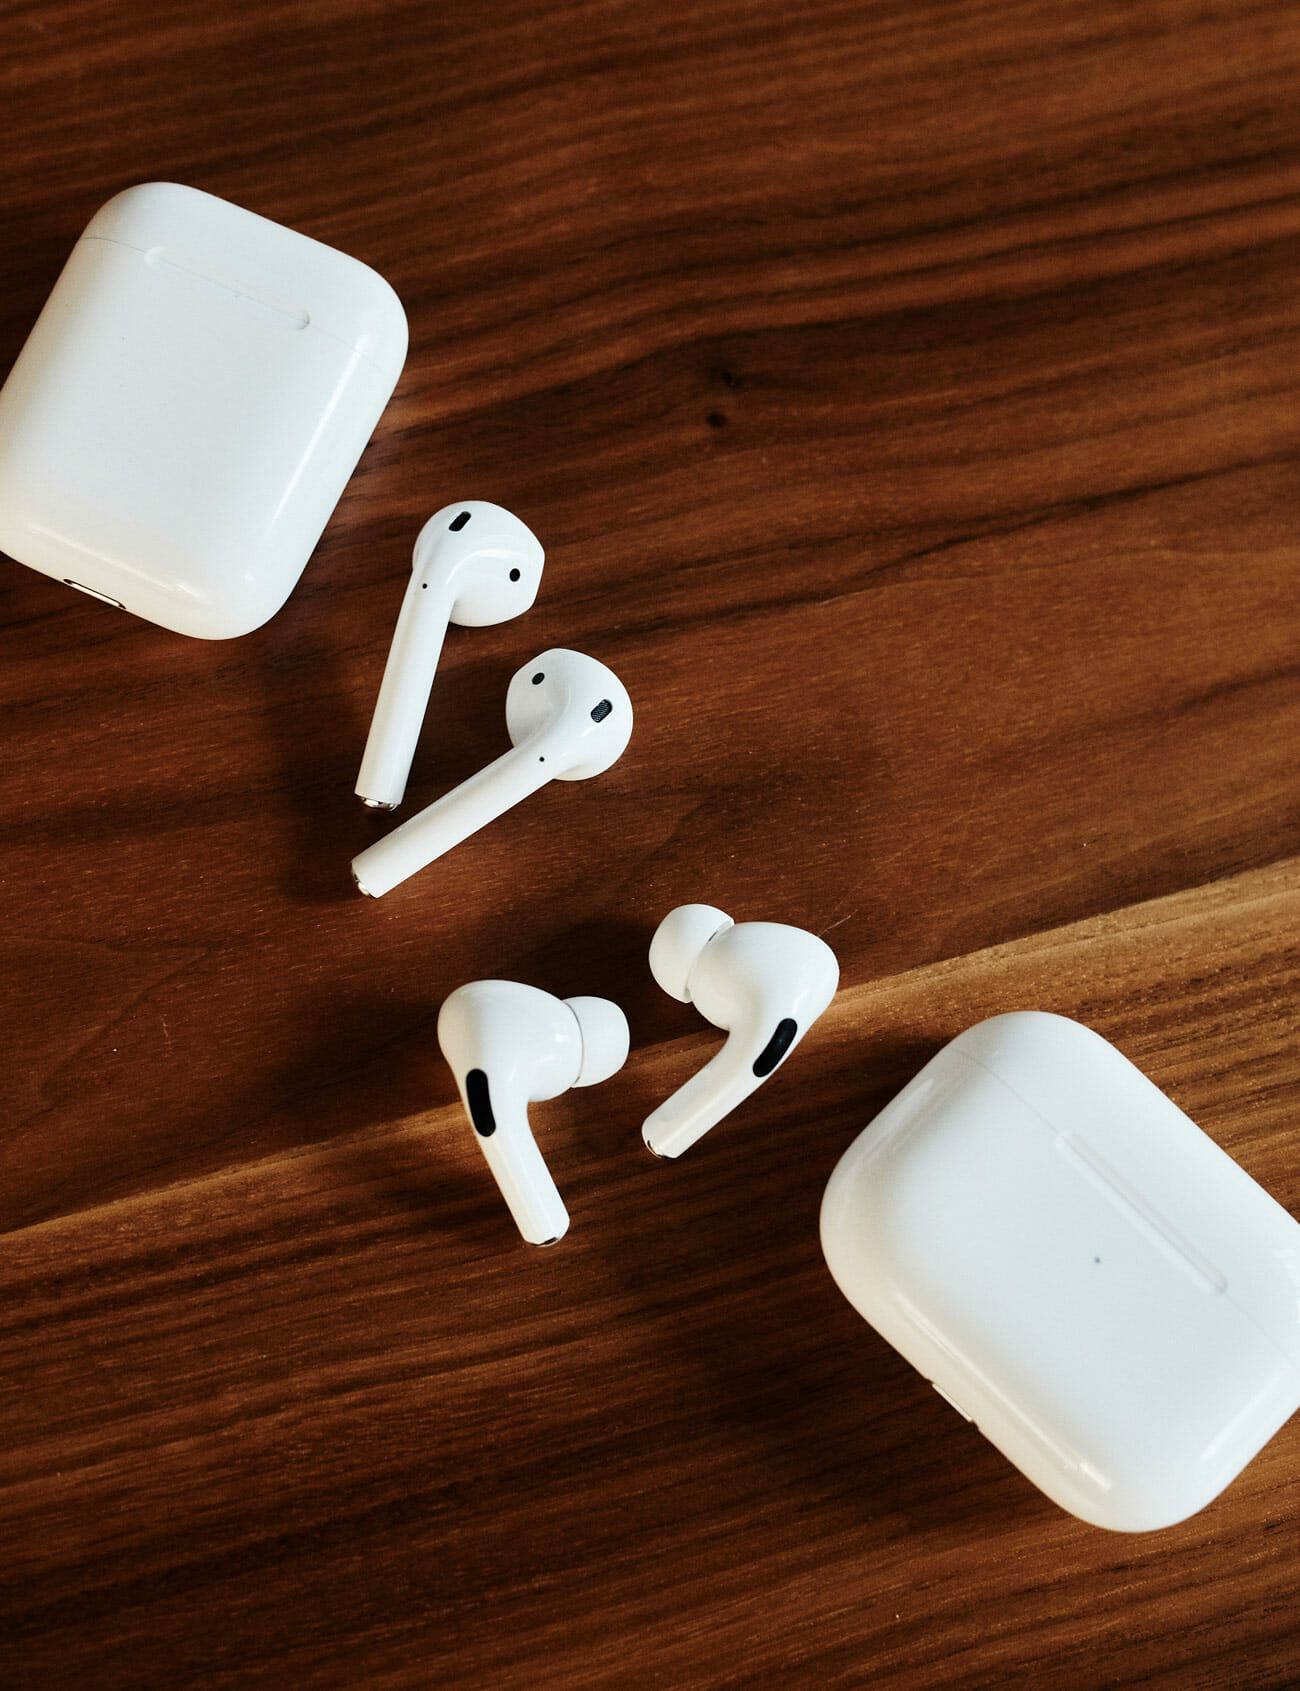 AirPods Flashing Orange? Here's How to Them